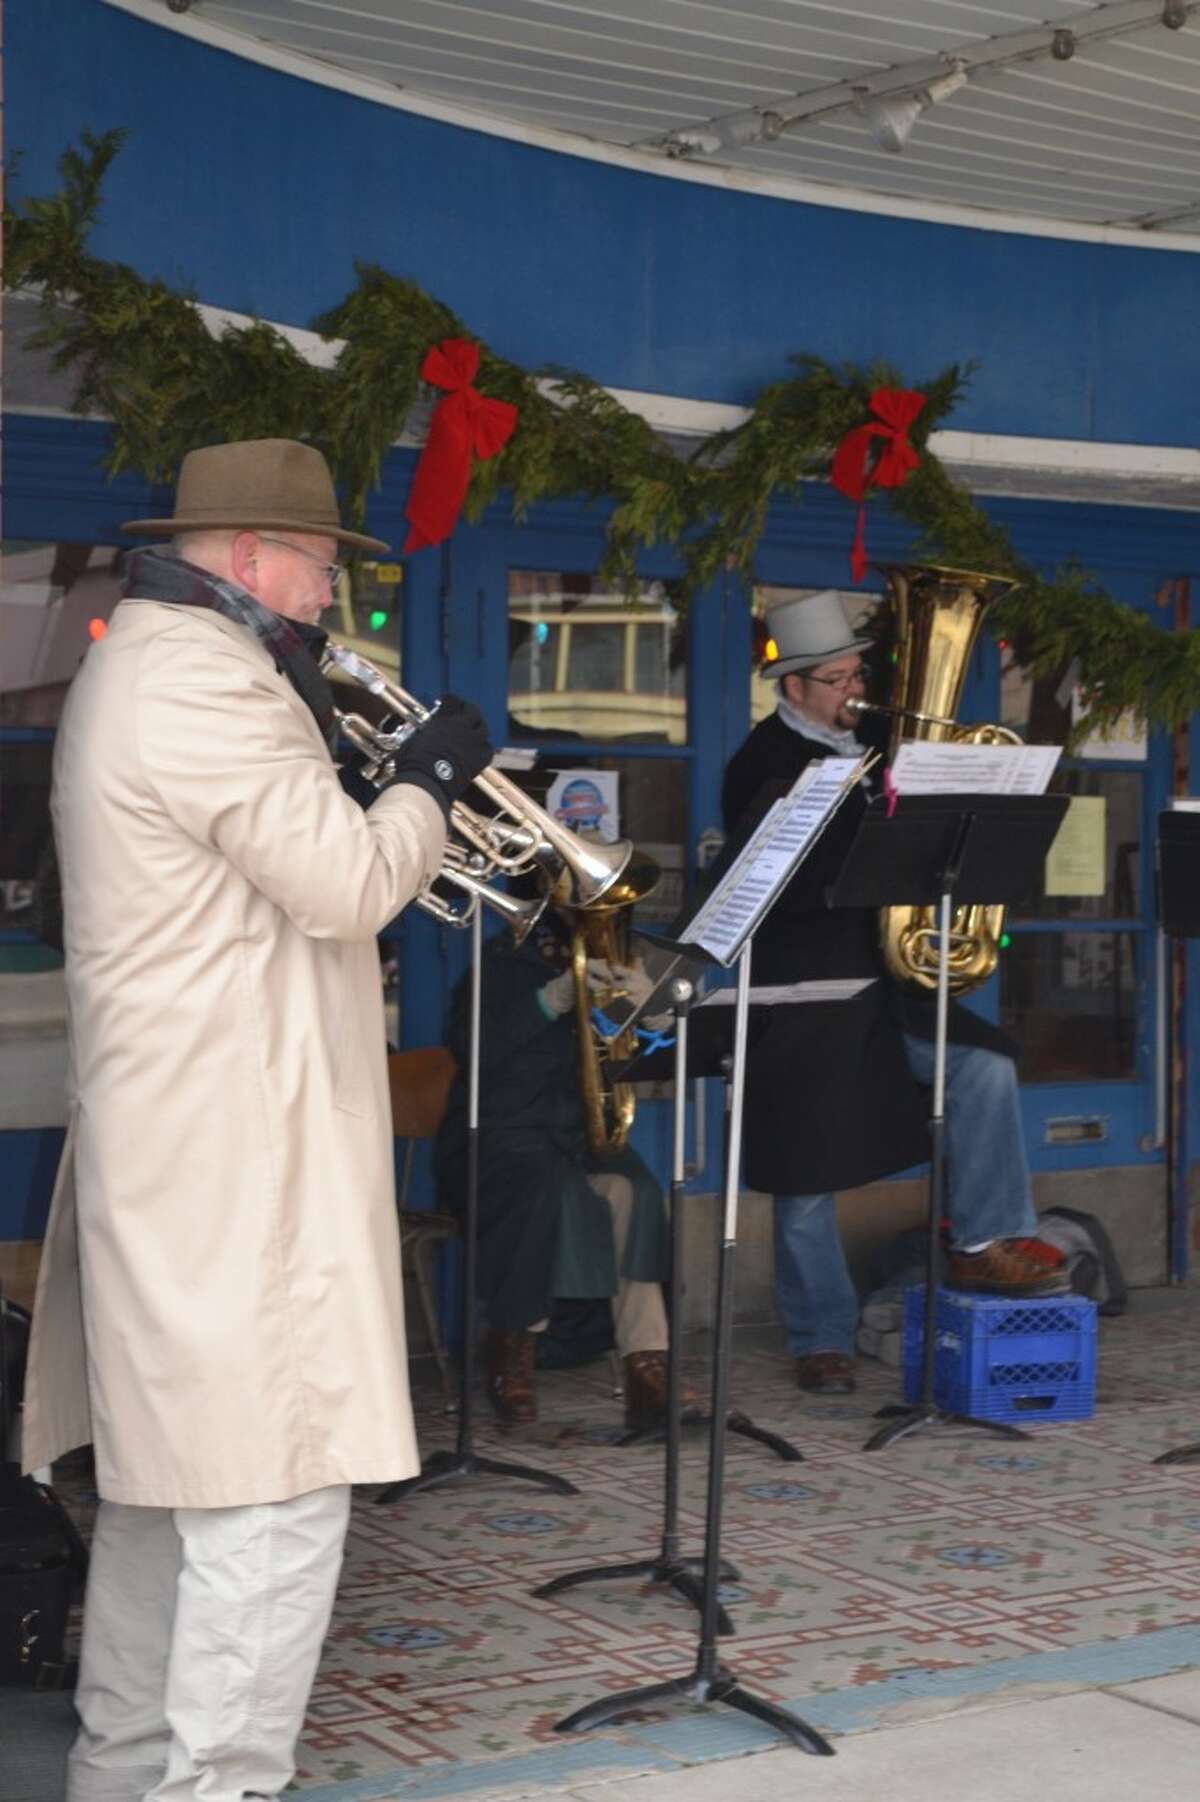 A member of the Manistee Community Band performing during their Christmas Concert on River Street. (Meg LeDuc / News Advocate)